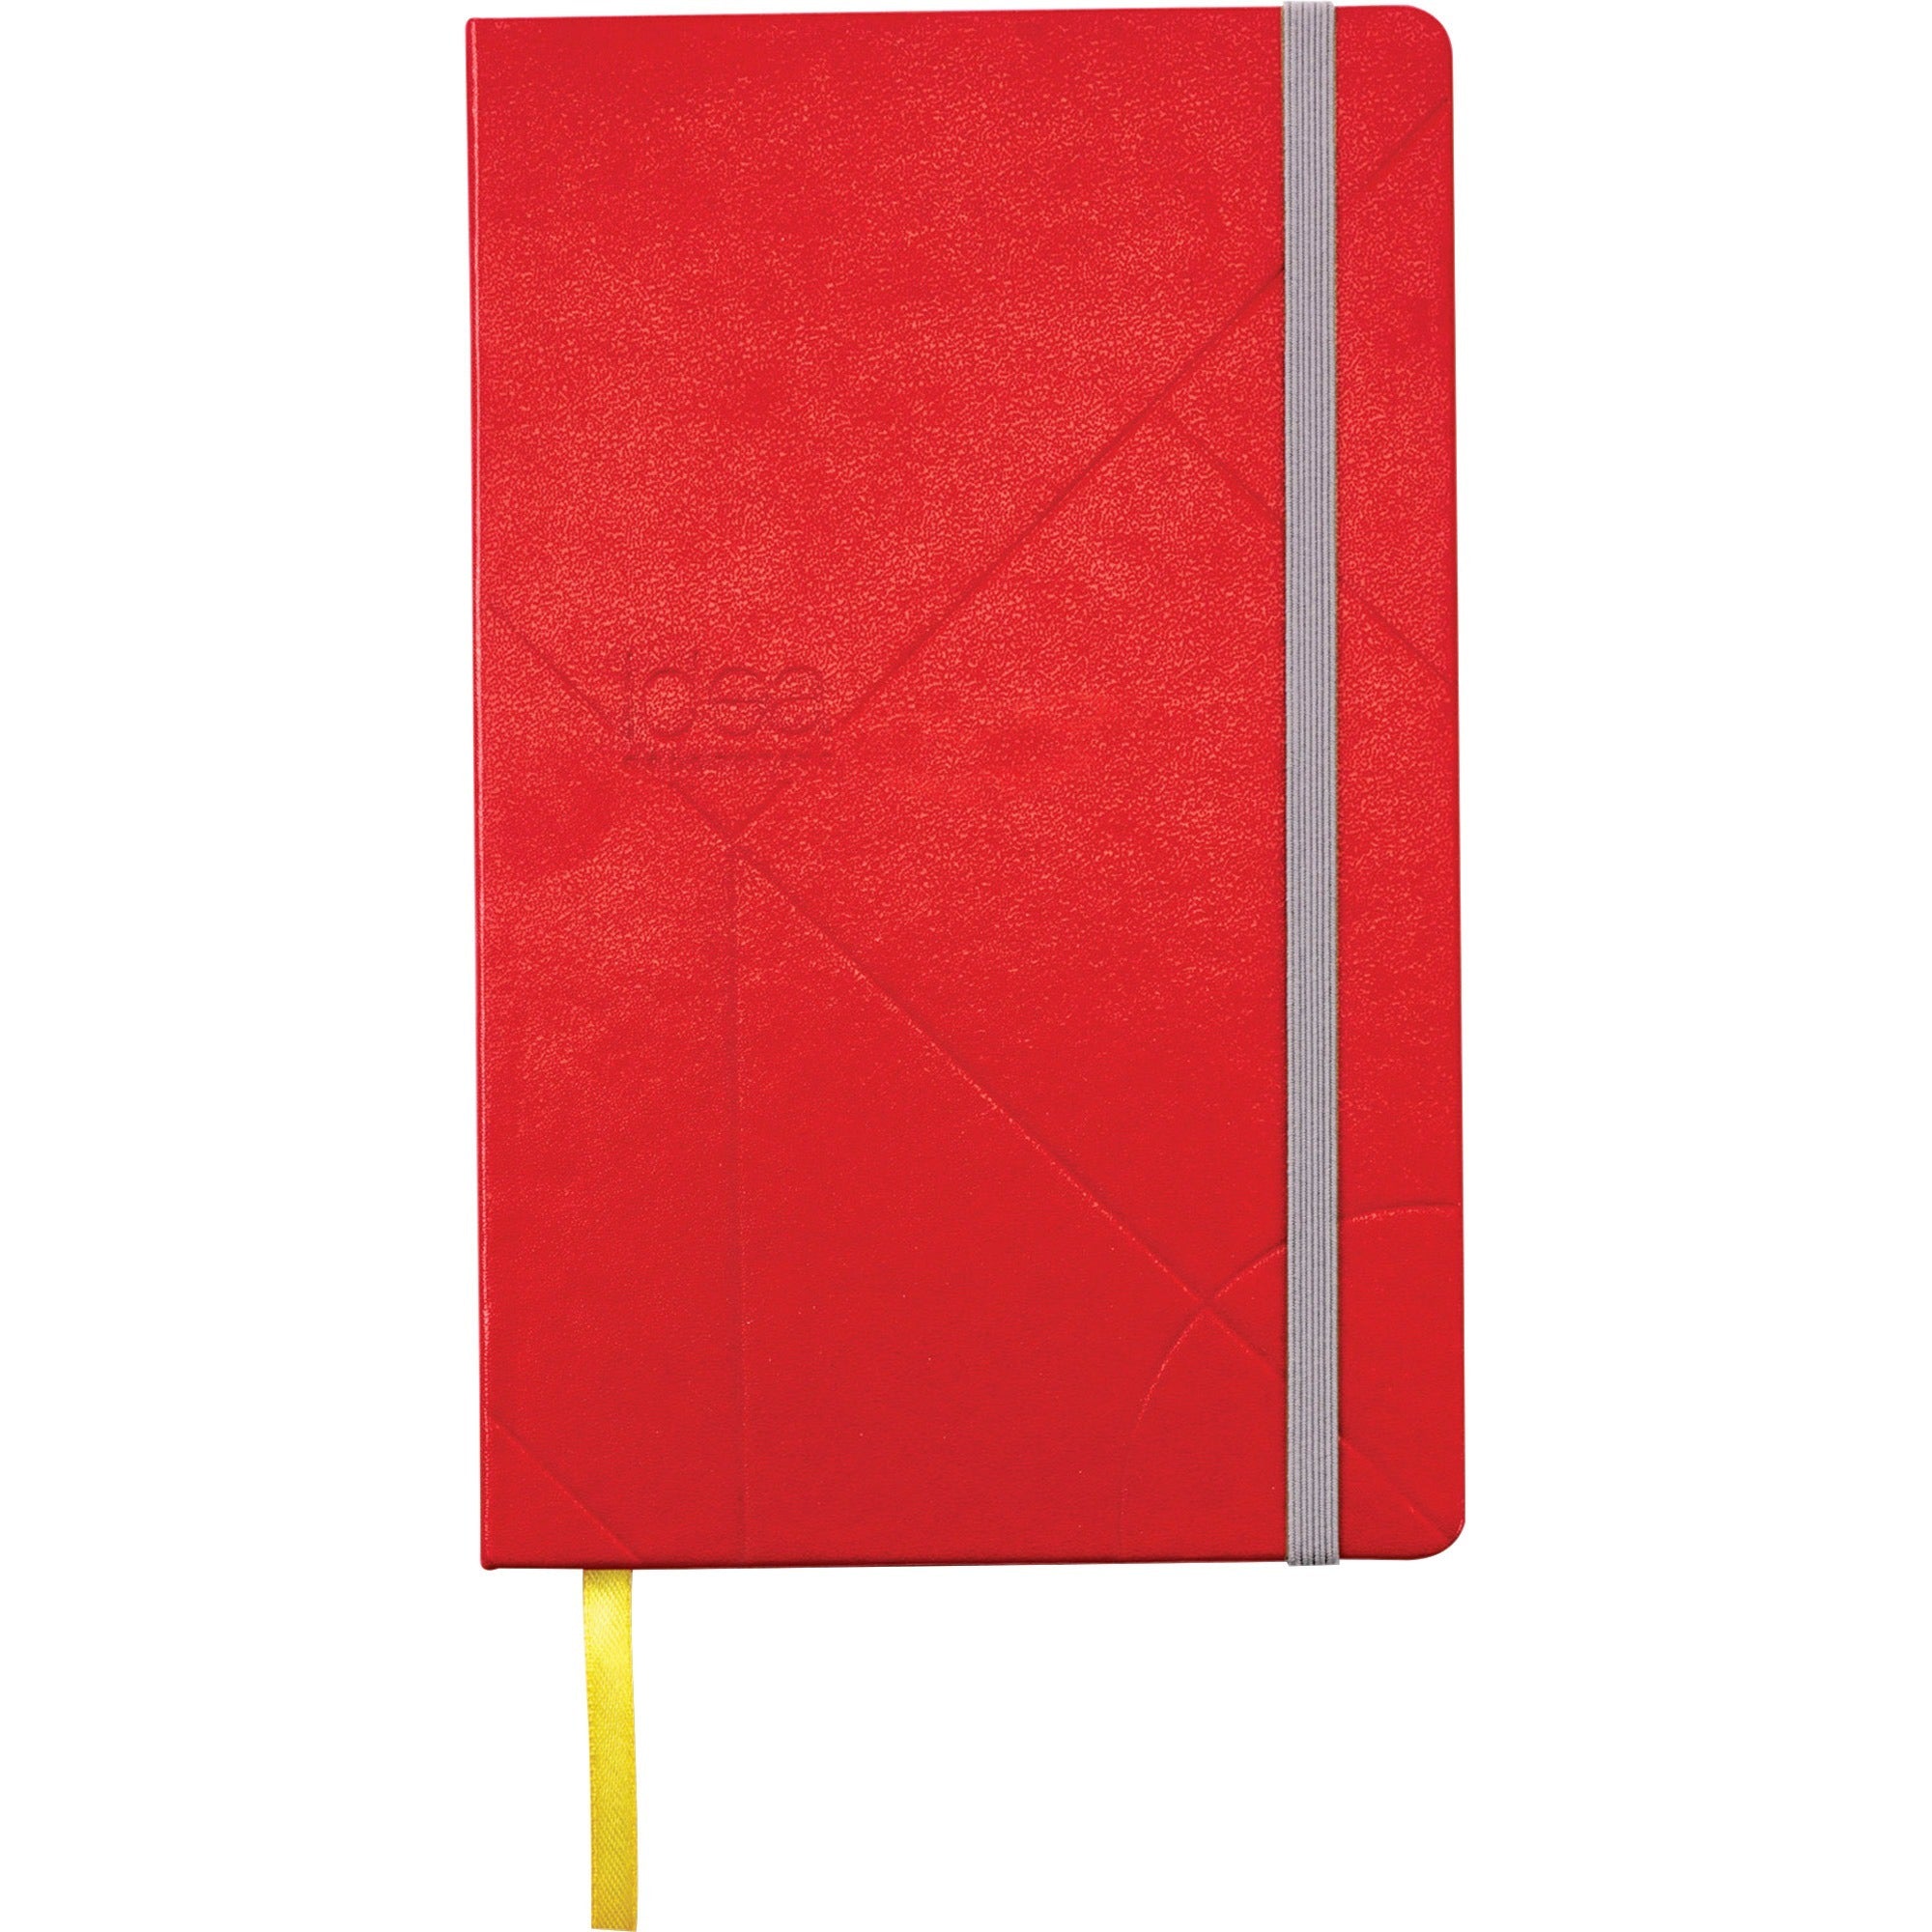 TOPS Idea Collective Hard Cover Journal - 120 Sheets - 5" x 8 1/4" - 0.63" x 5" x 8.3" - Cream Paper - Red Cover - Acid-free, Durable Cover, Ribbon Marker, Elastic Closure, Pocket - 1 Each - 